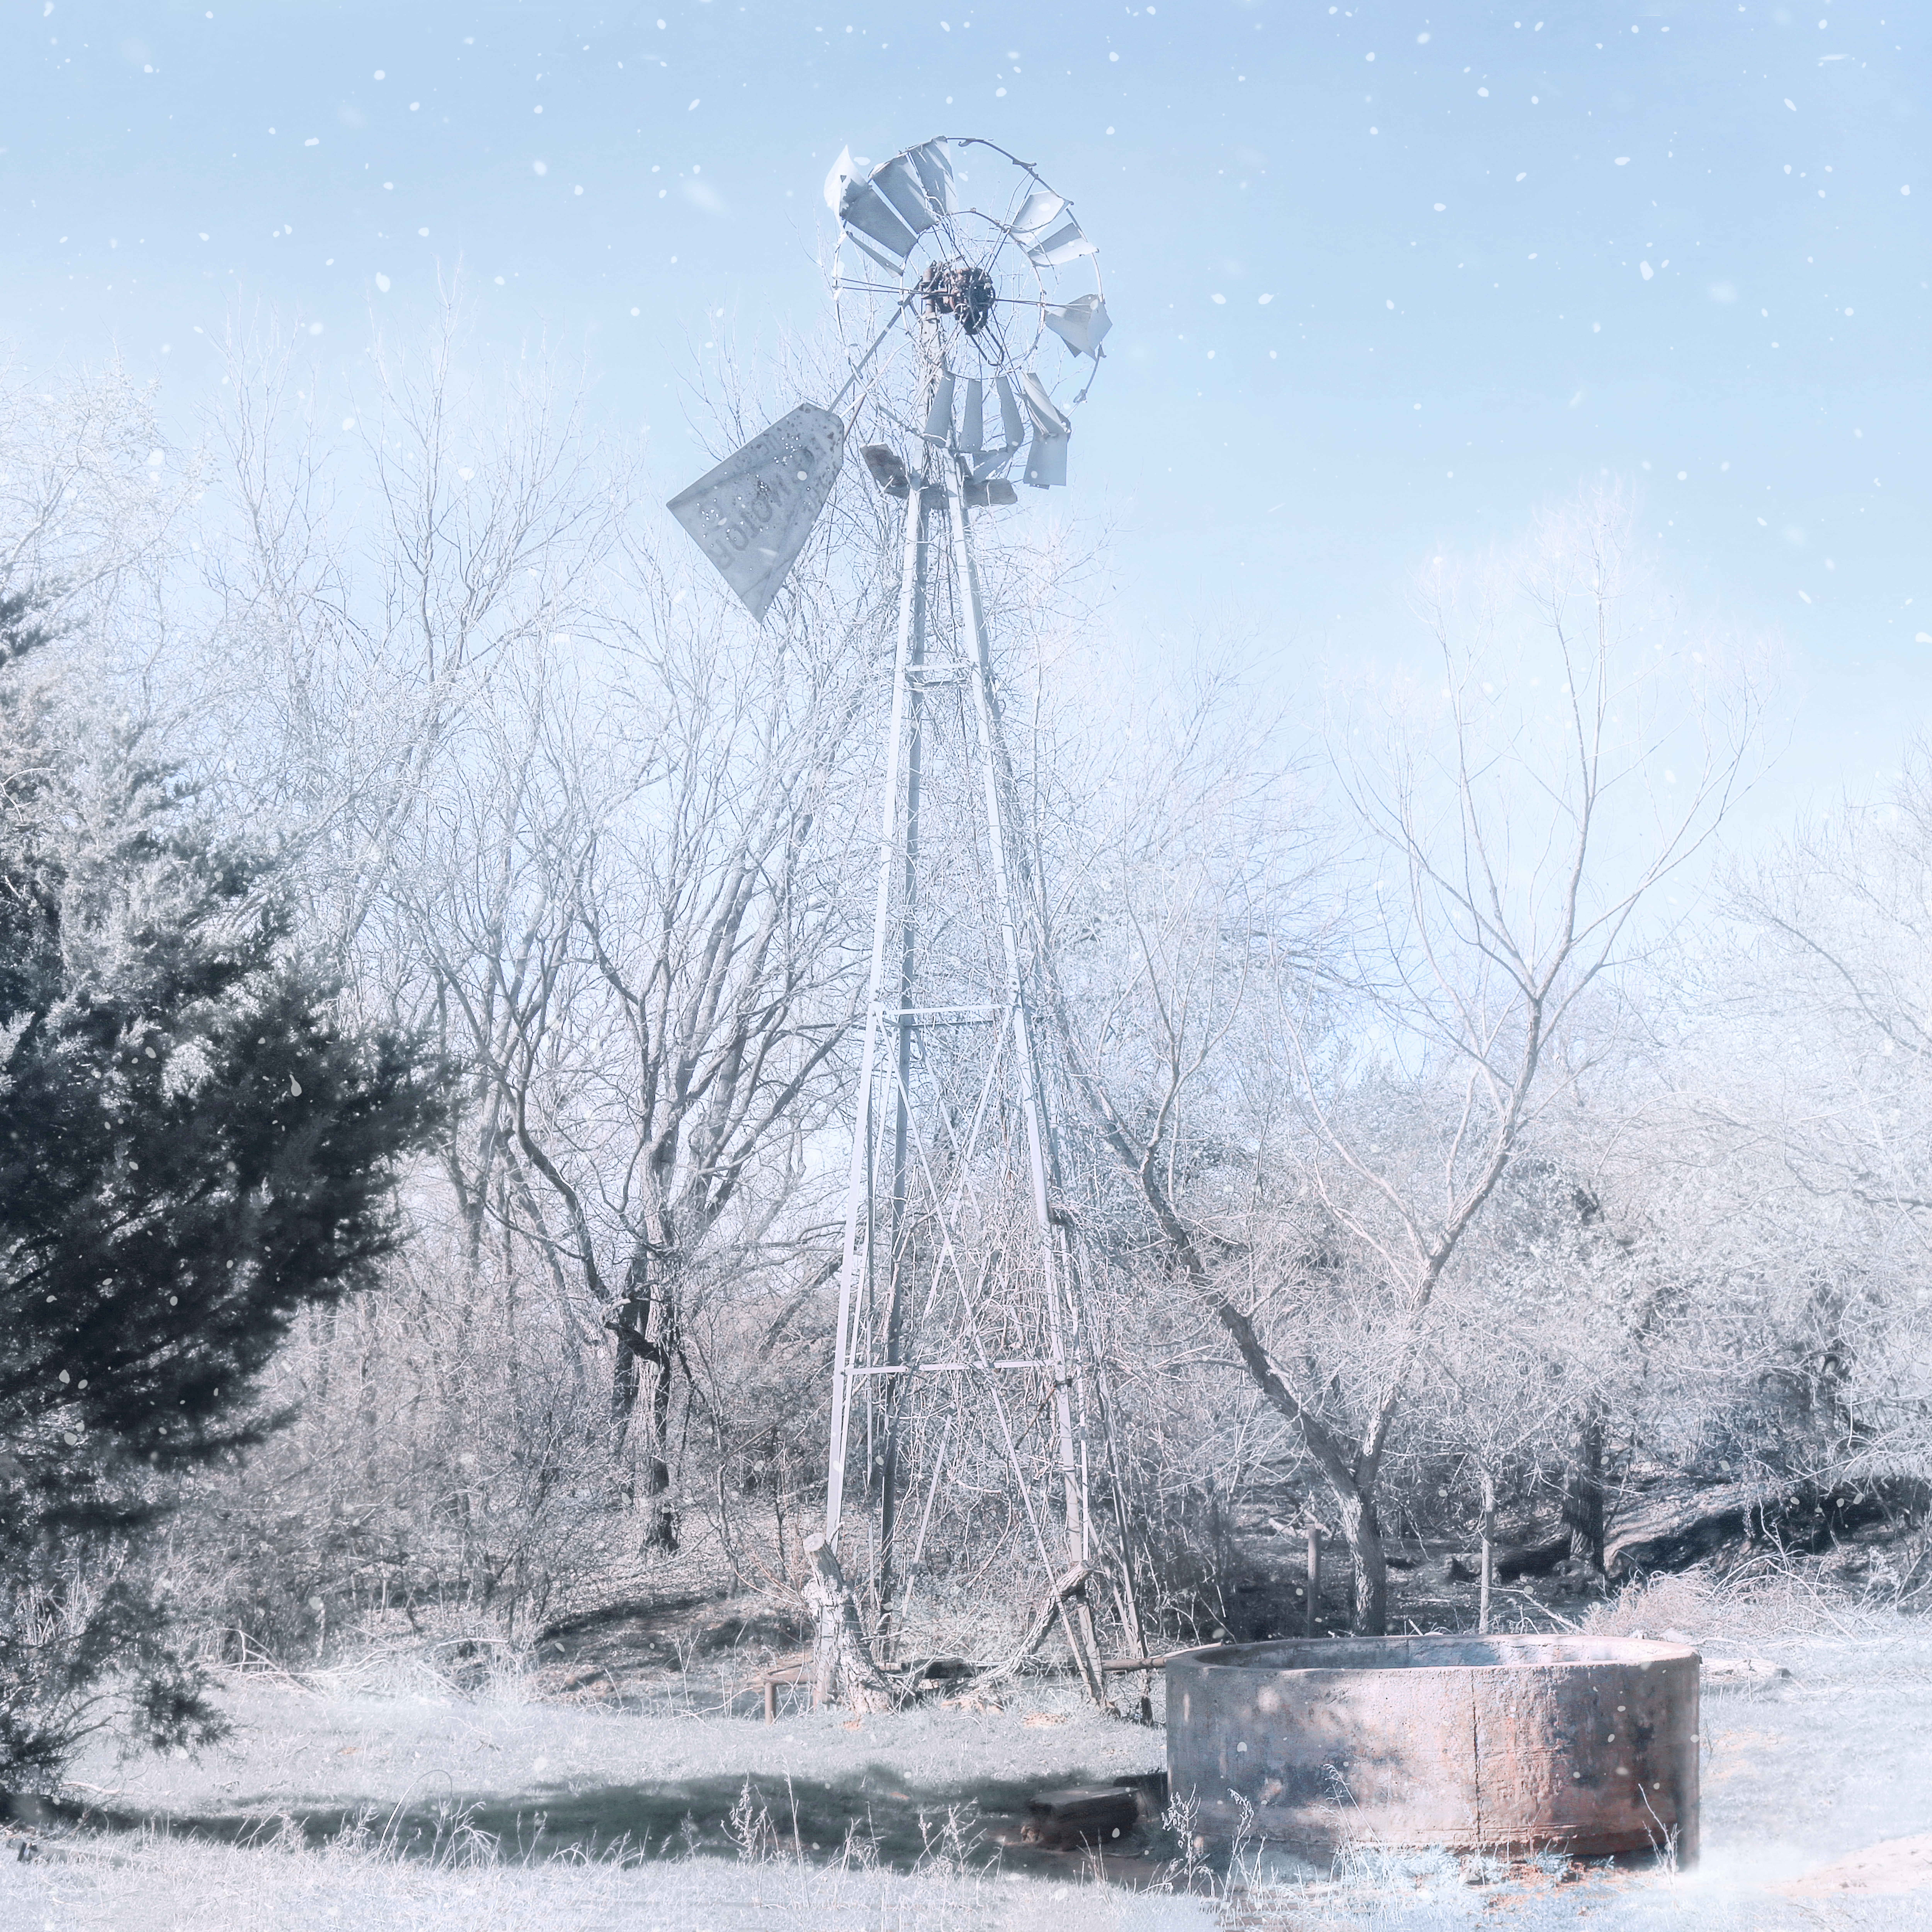 fye_photo_submission-Cotton-County-Land-Run-property-windmill